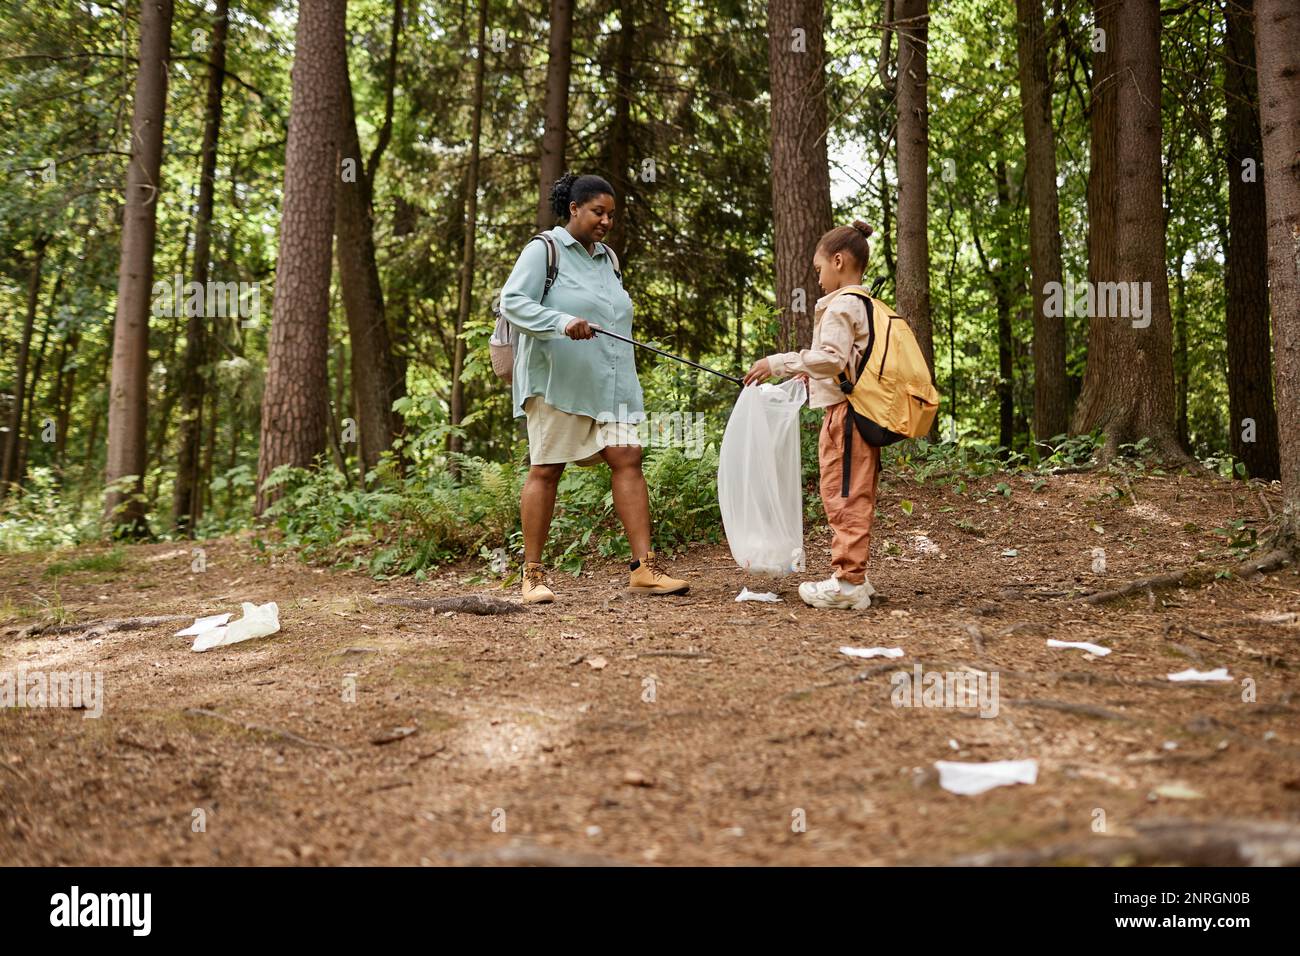 Side view portrait of mother and daughter picking plastic bottles on nature trail, copy space Stock Photo